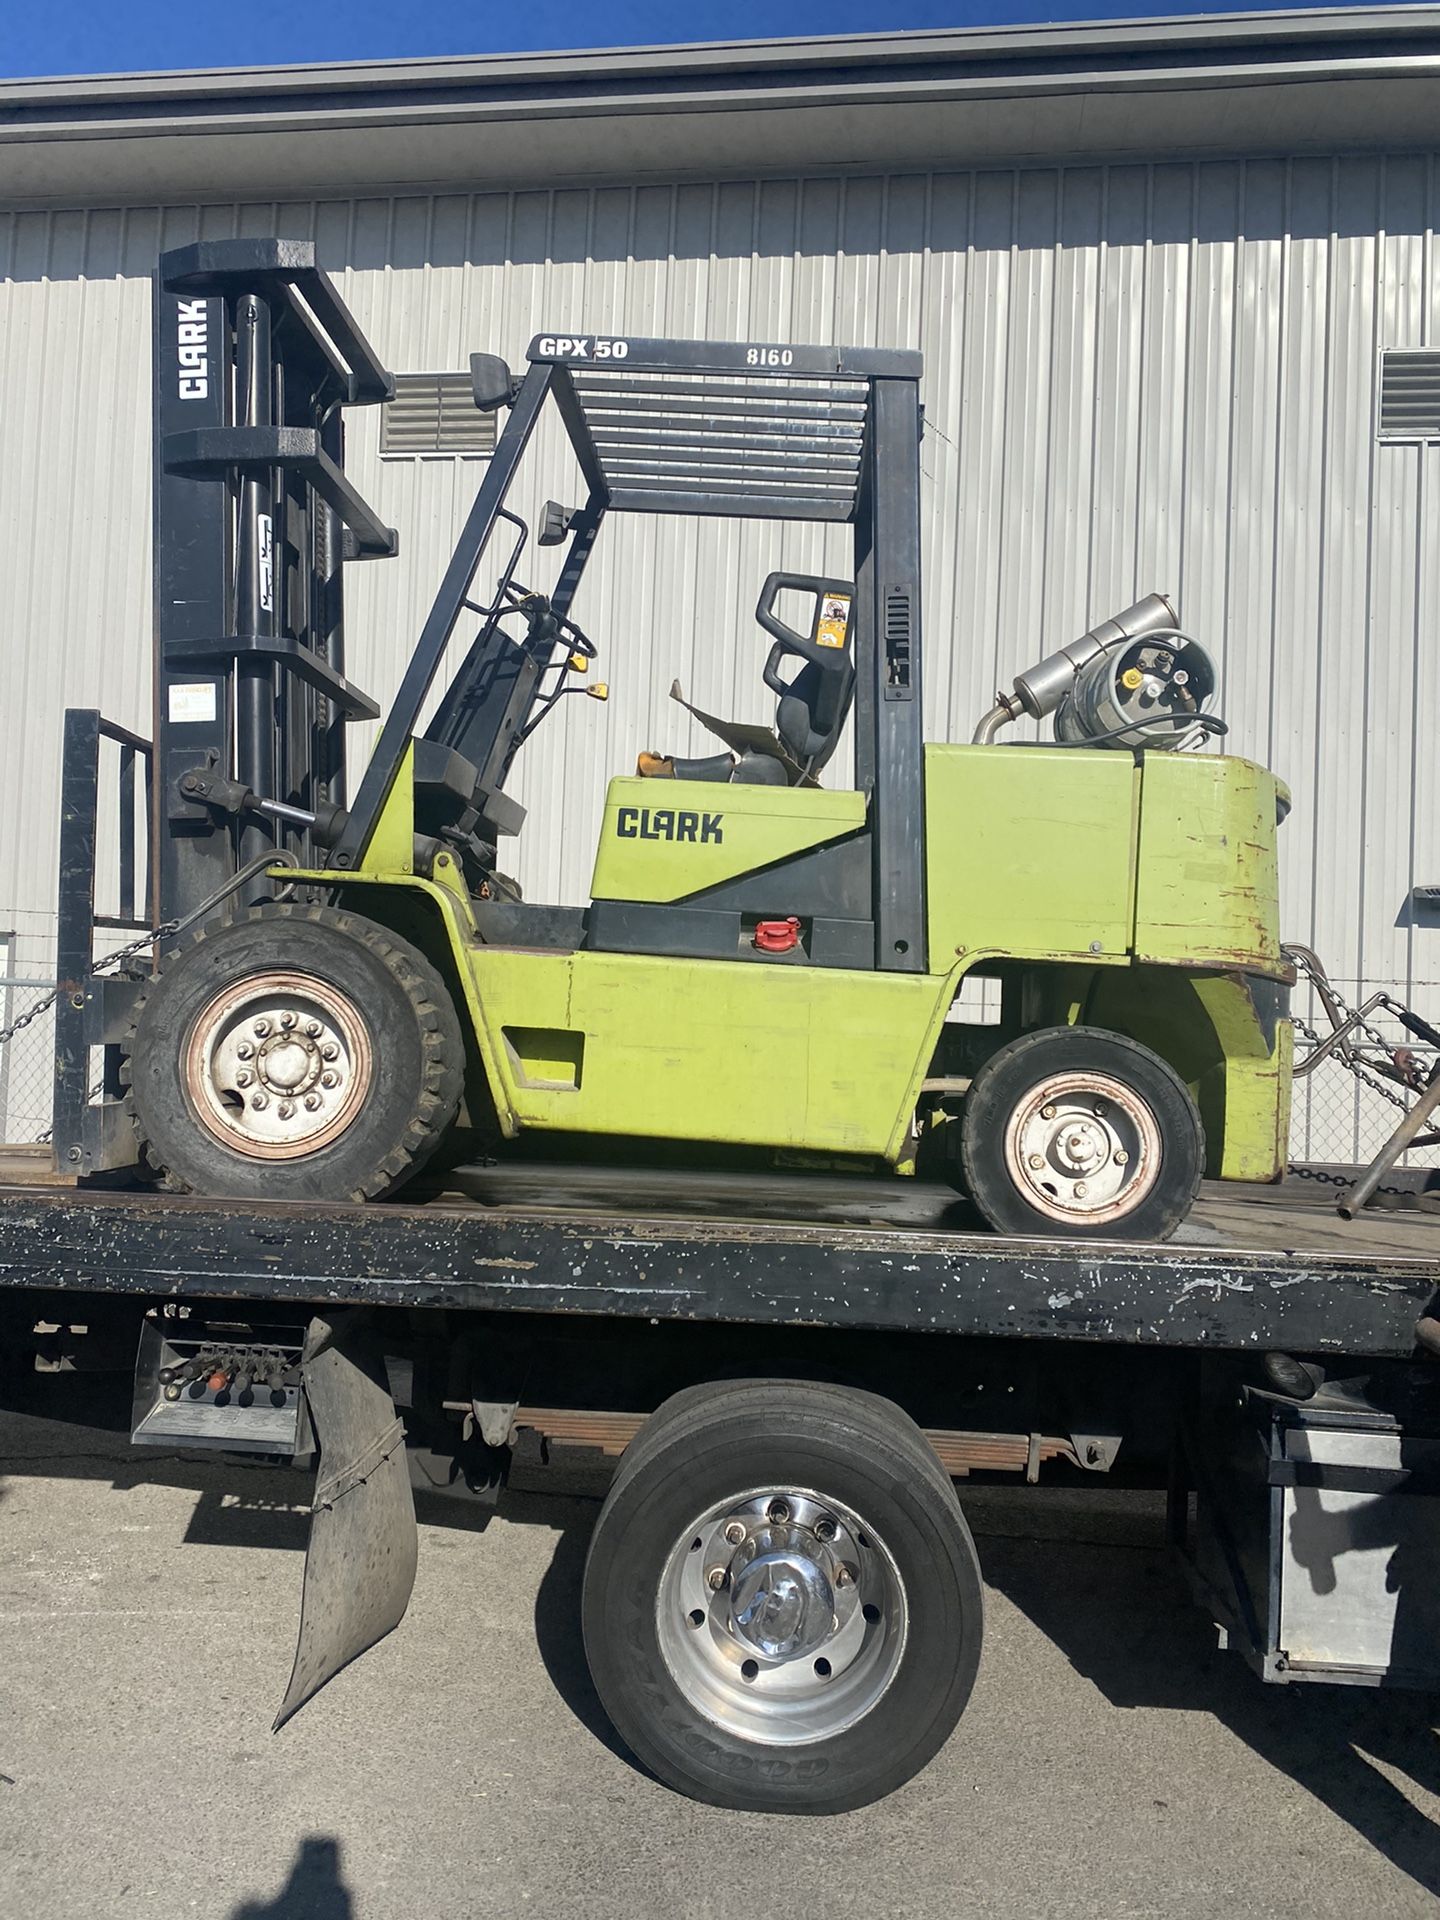 Forklift 10,000 lbs capacity